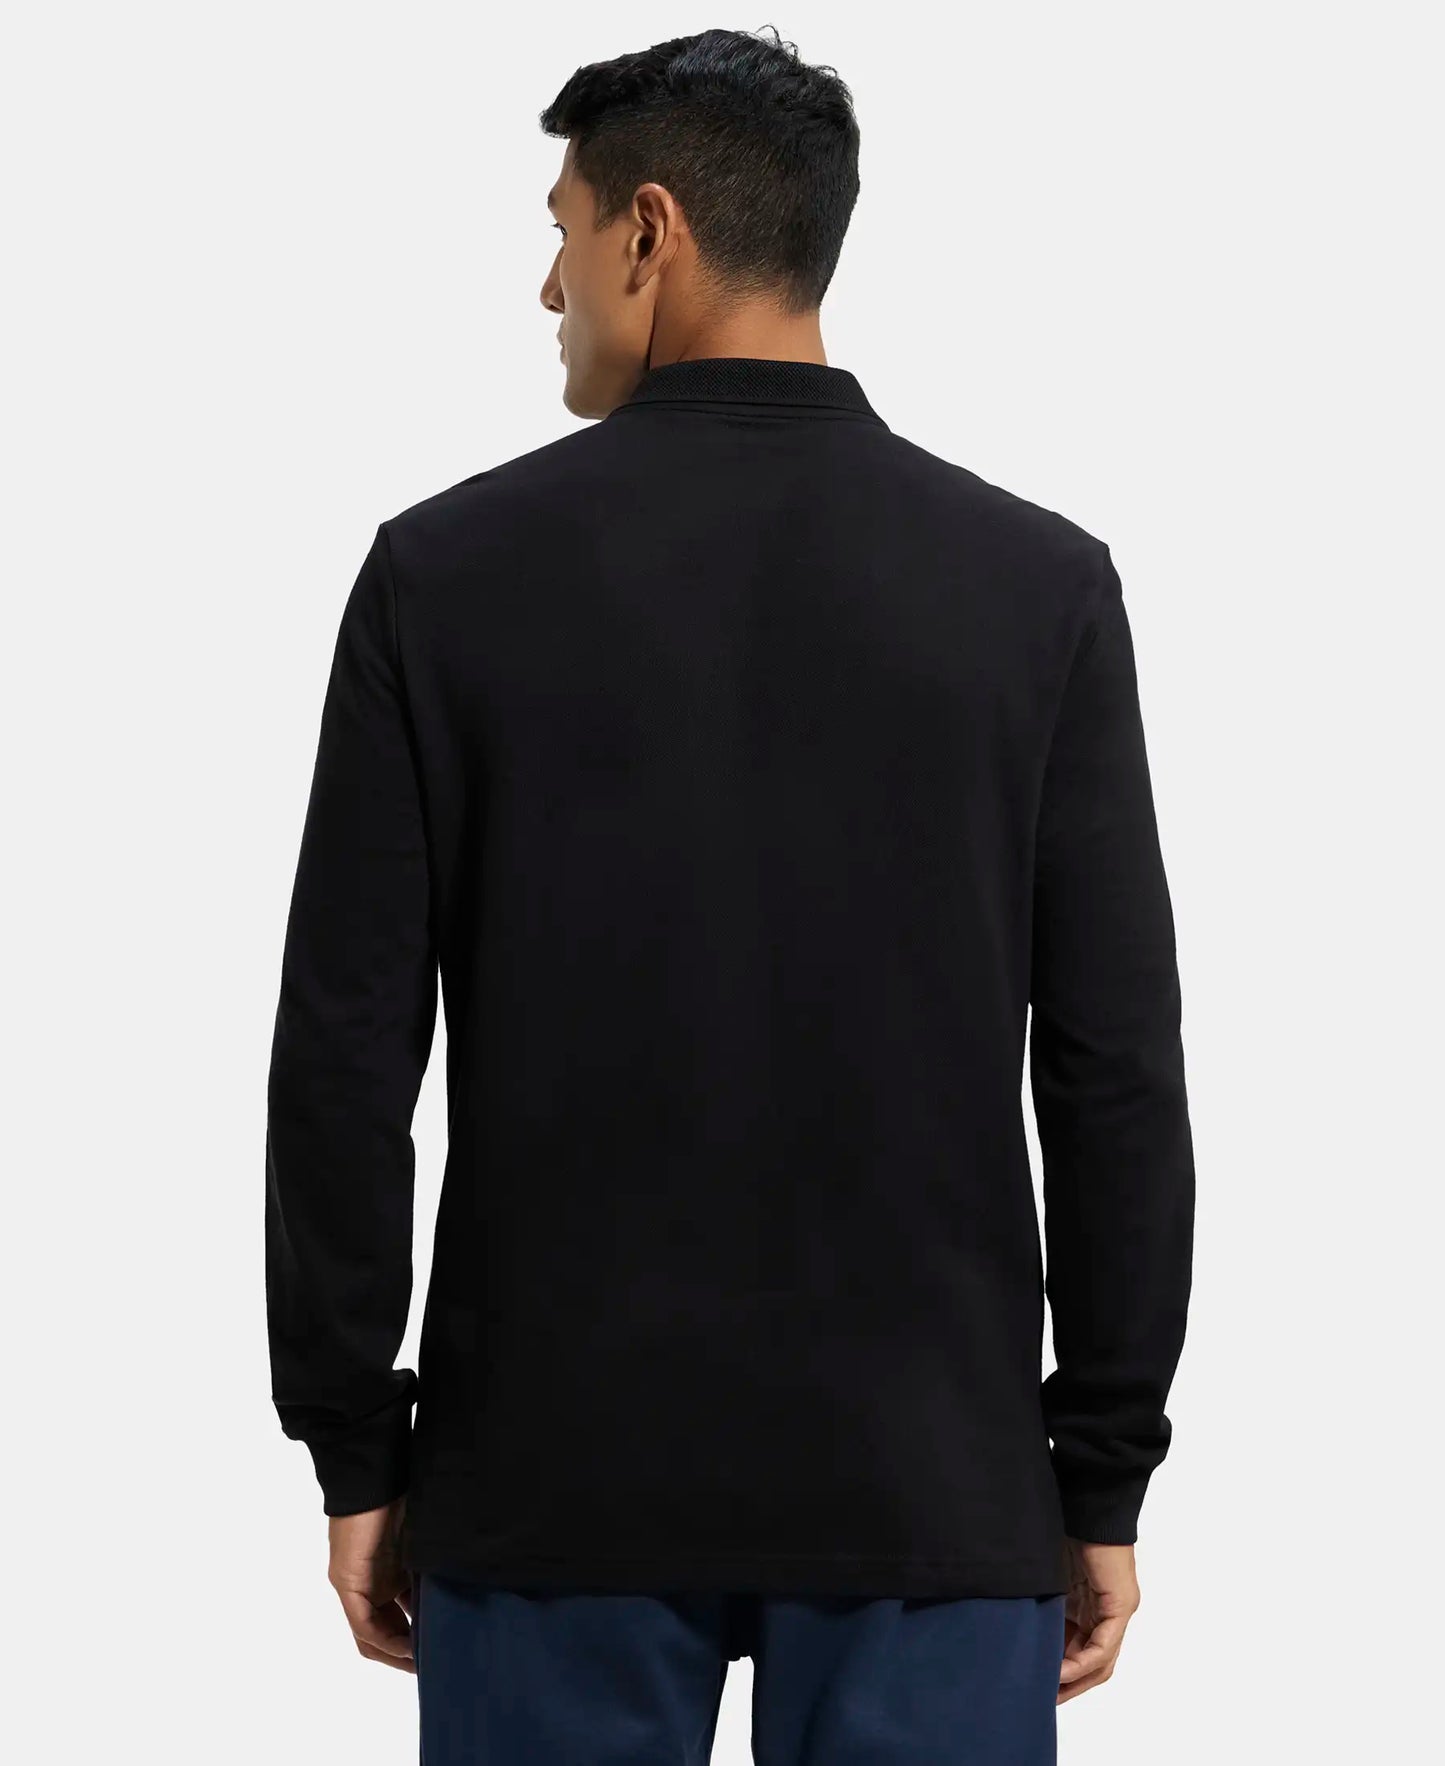 Super Combed Cotton Rich Pique Fabric Solid Full Sleeve Polo T-Shirt with Ribbed Cuffs - Black-3